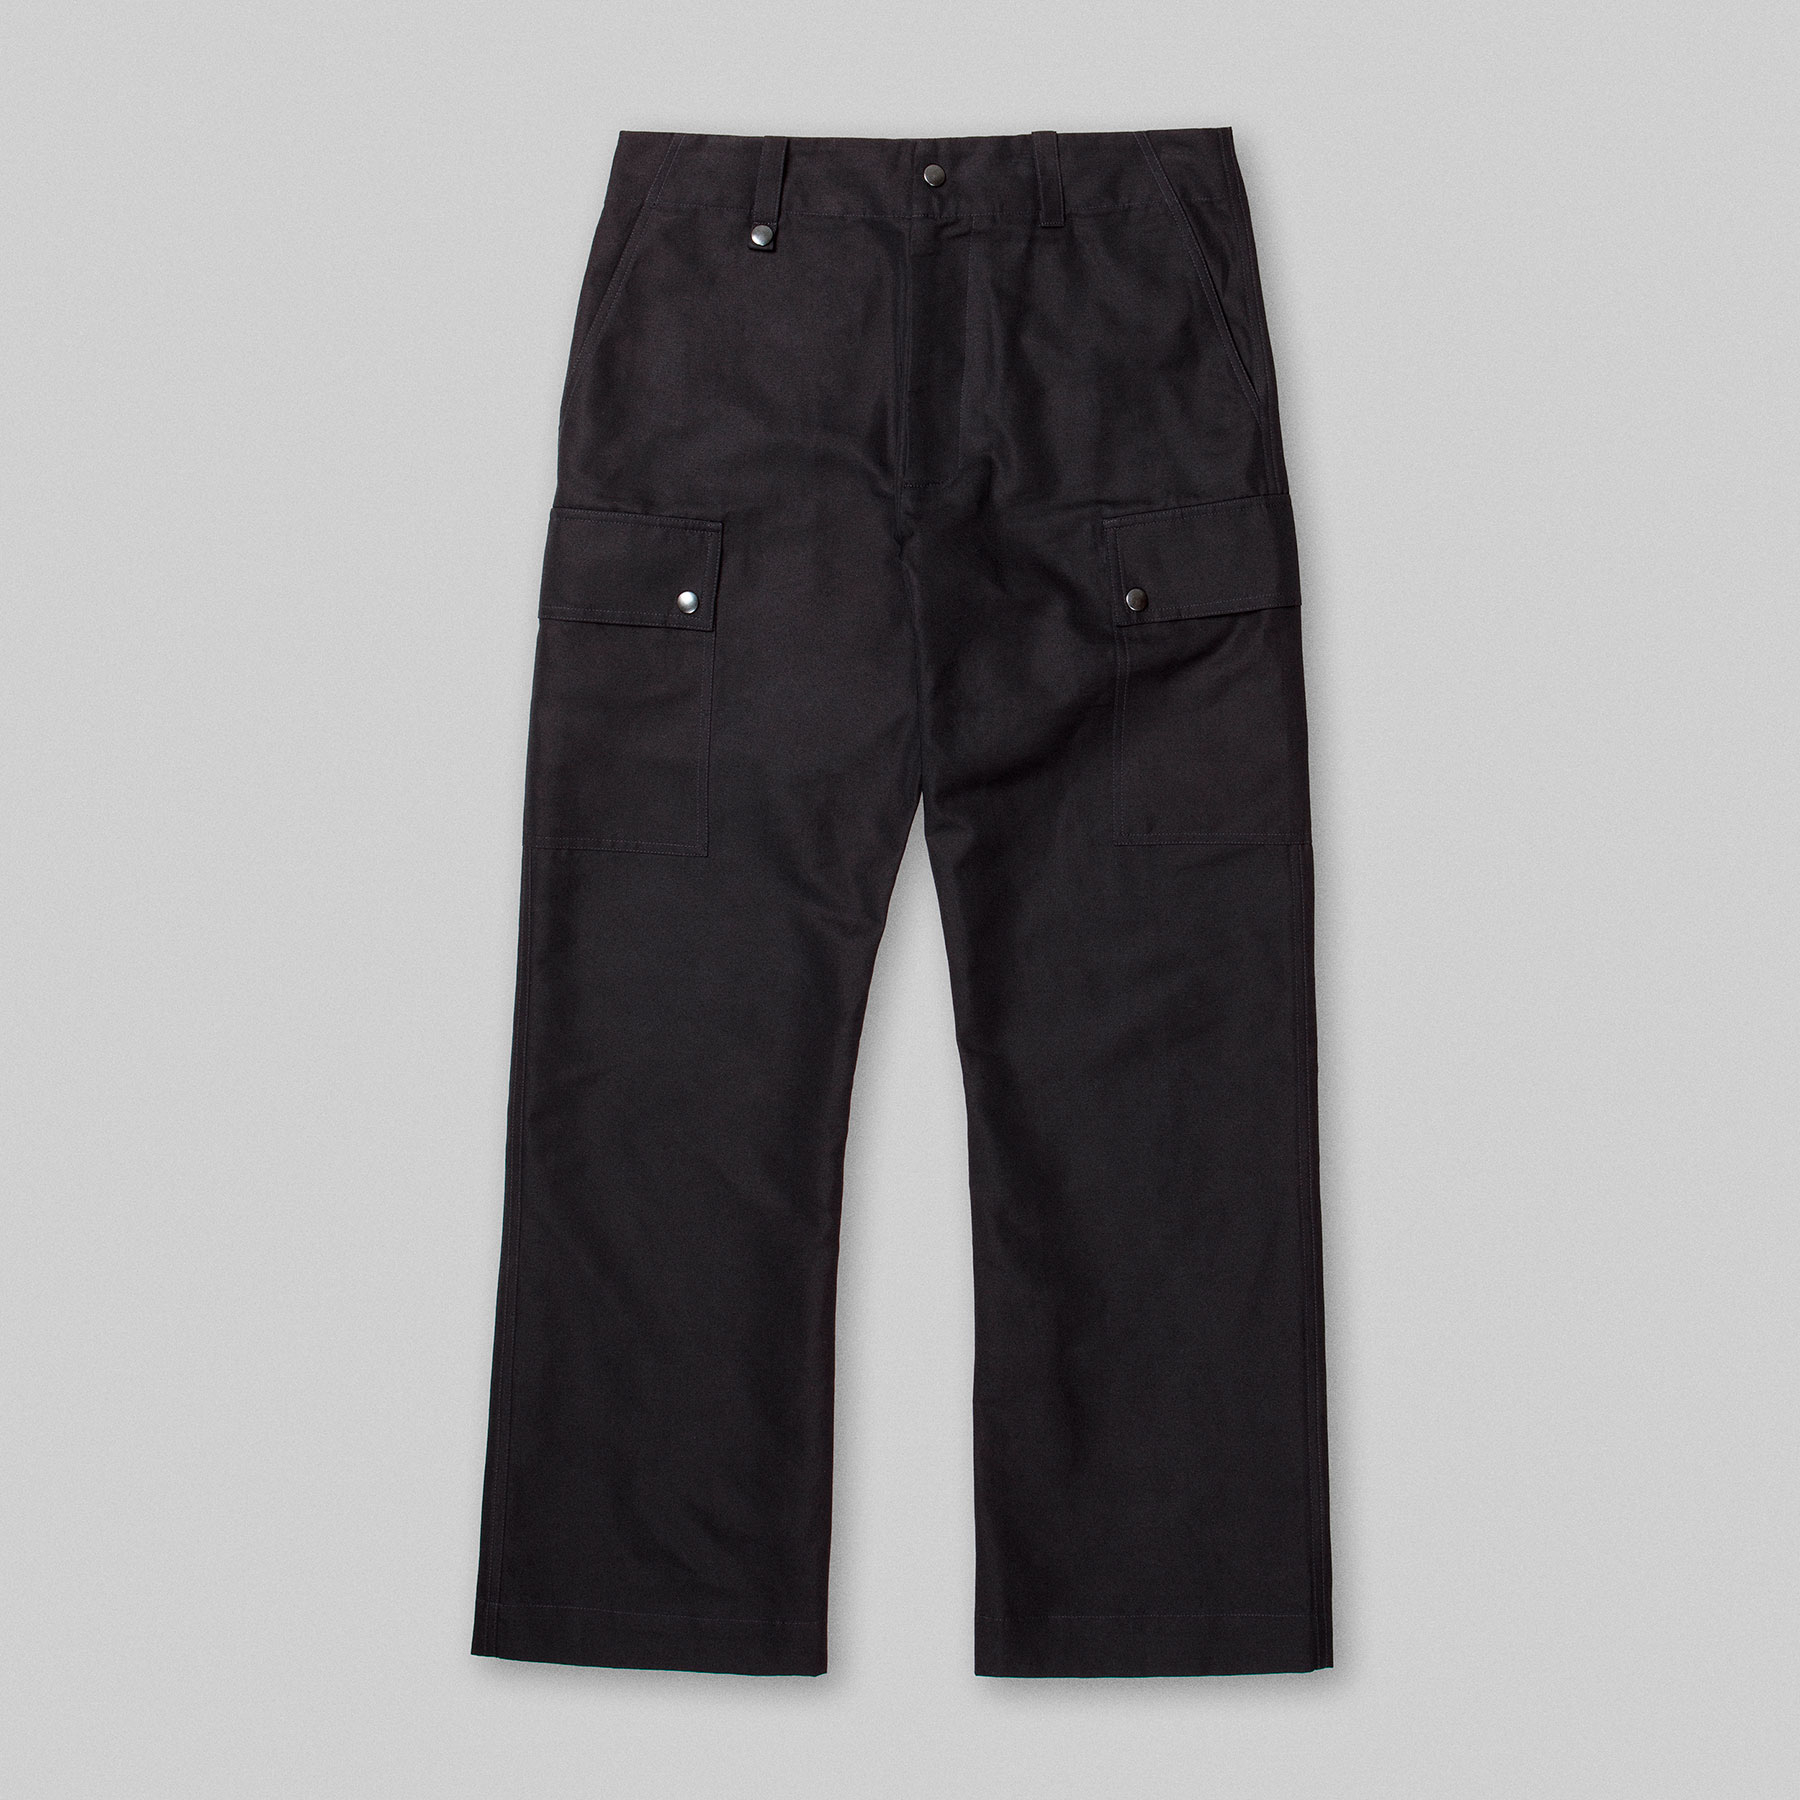 DECK Pants by Arpenteur in Midnight color